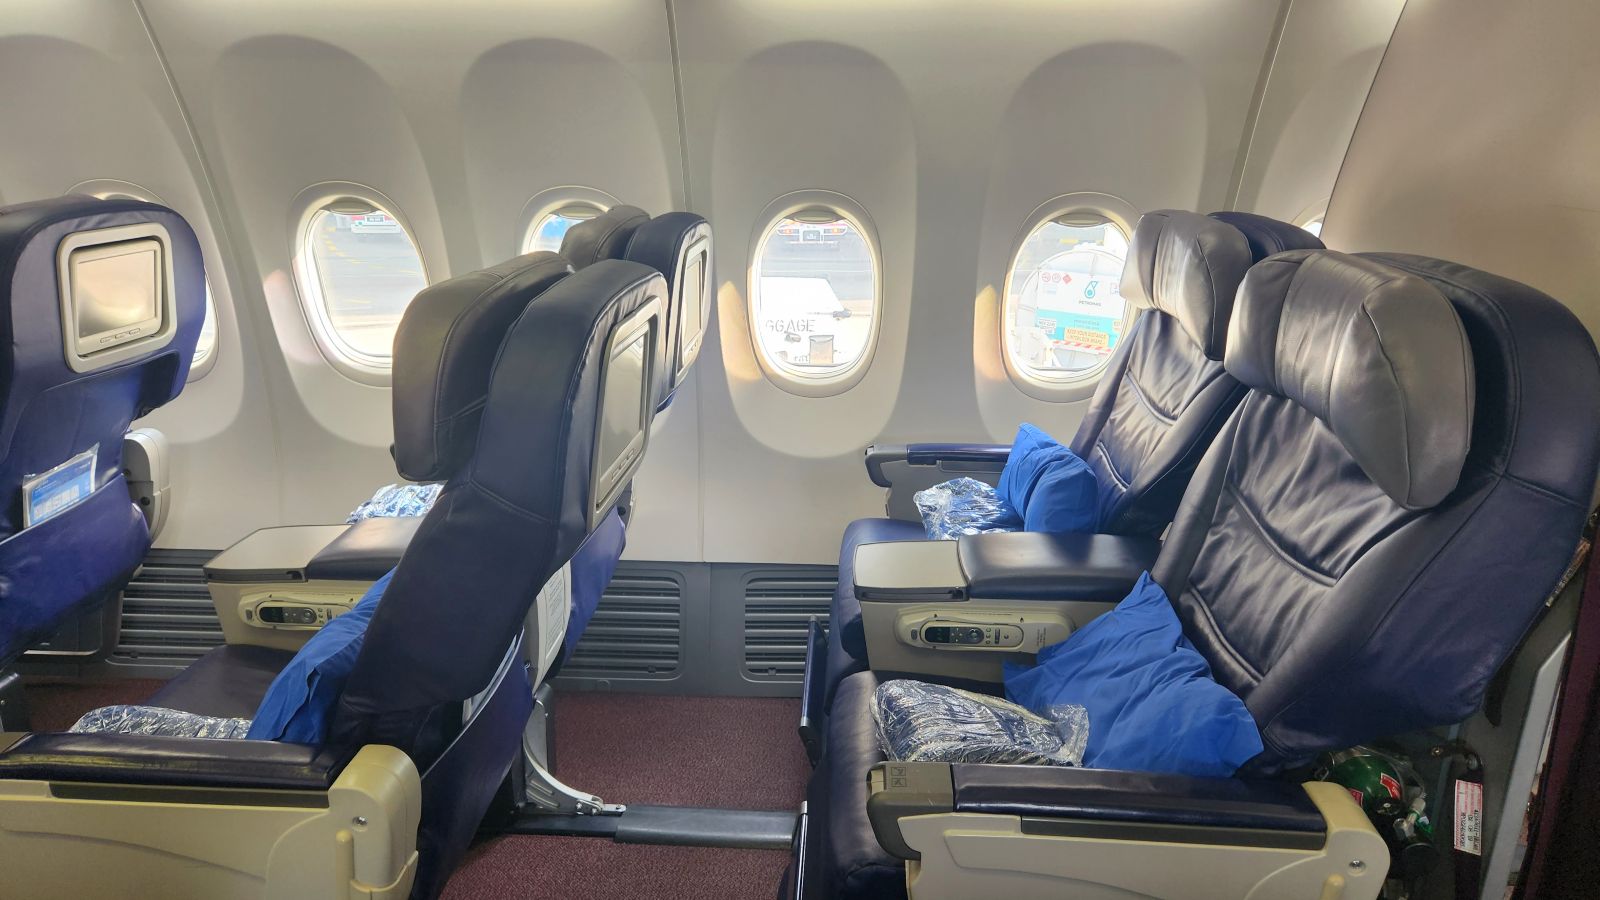 Malaysia Airlines Business Class cabin - KUL-KTM